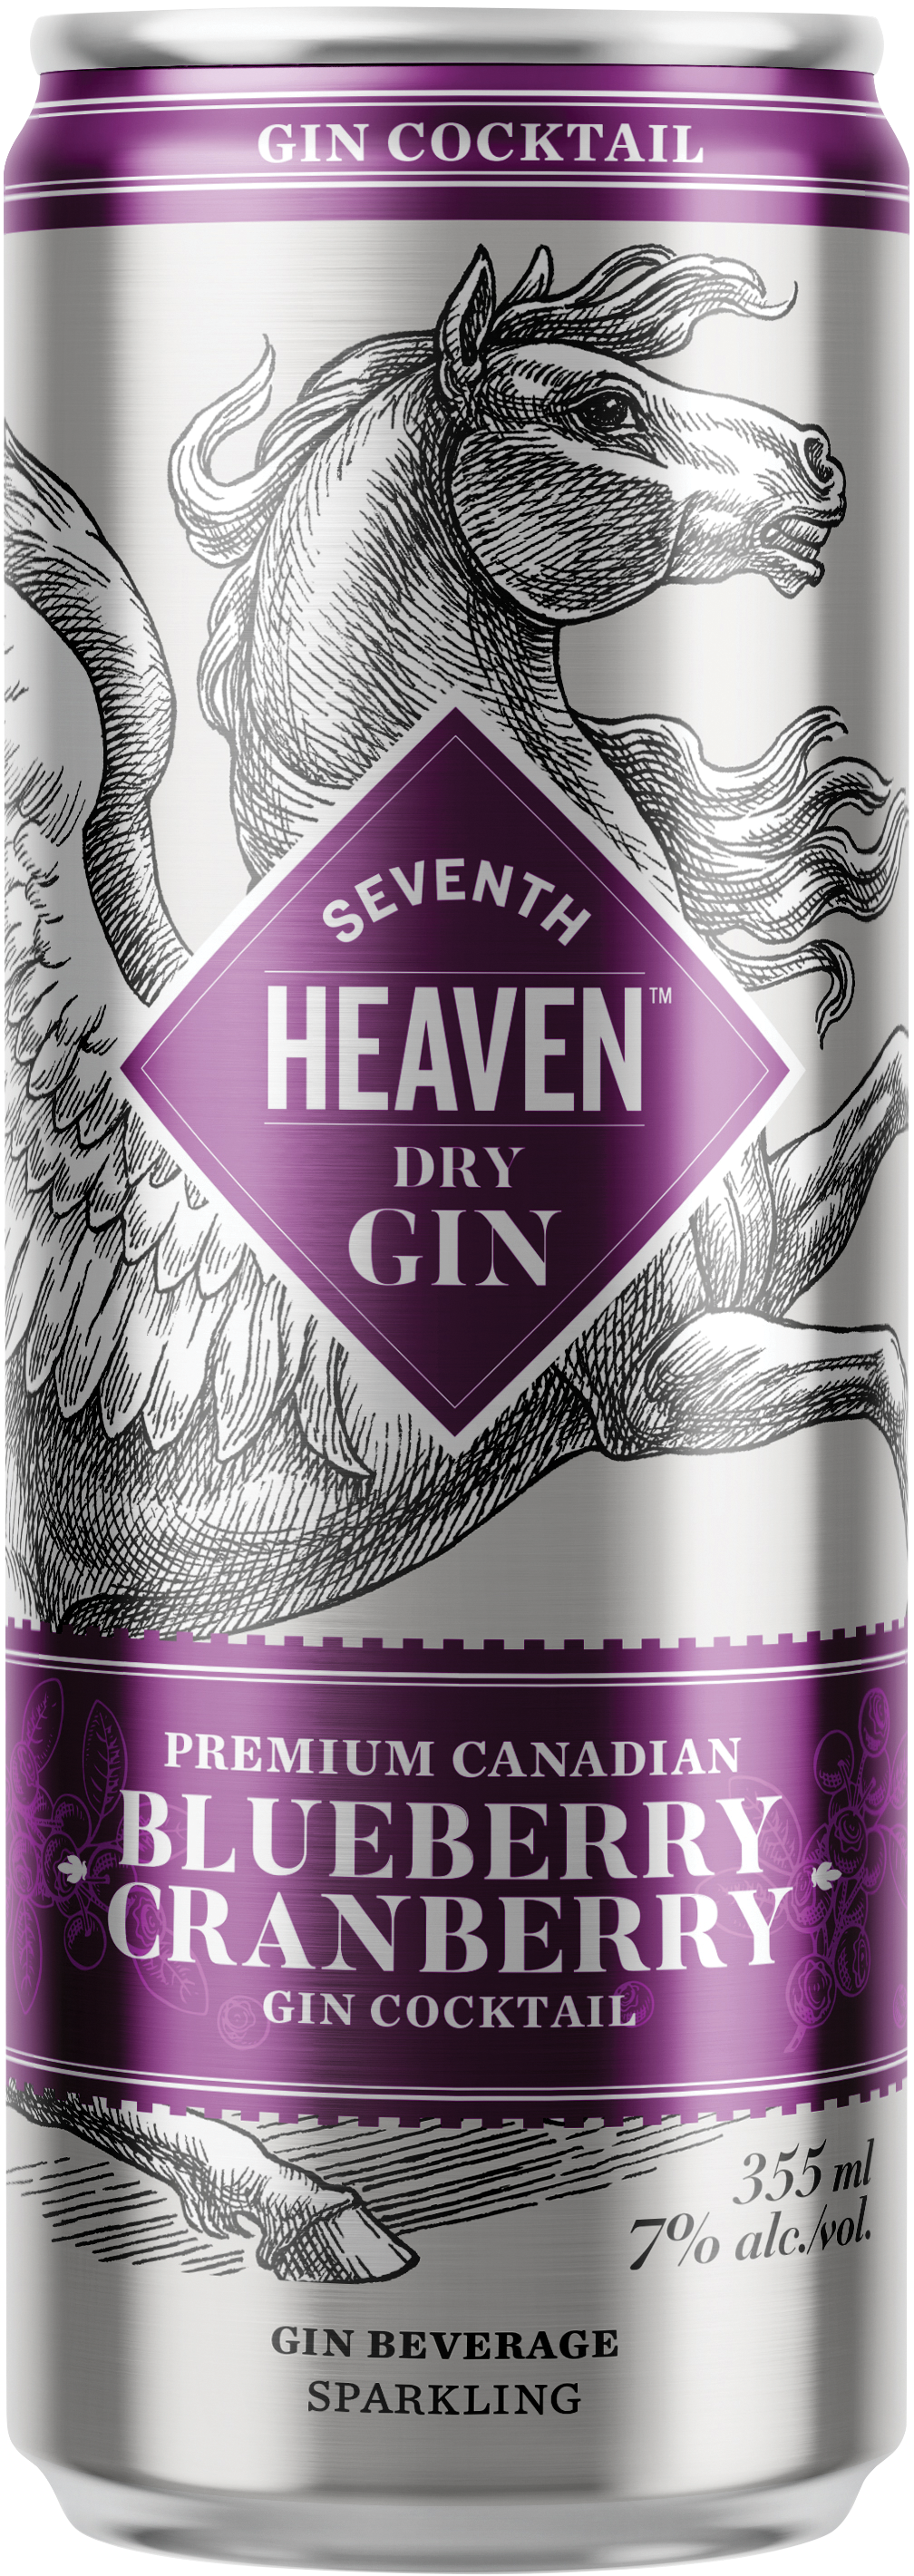 Seventh Heaven Blueberry Cranberry Gin Cocktail